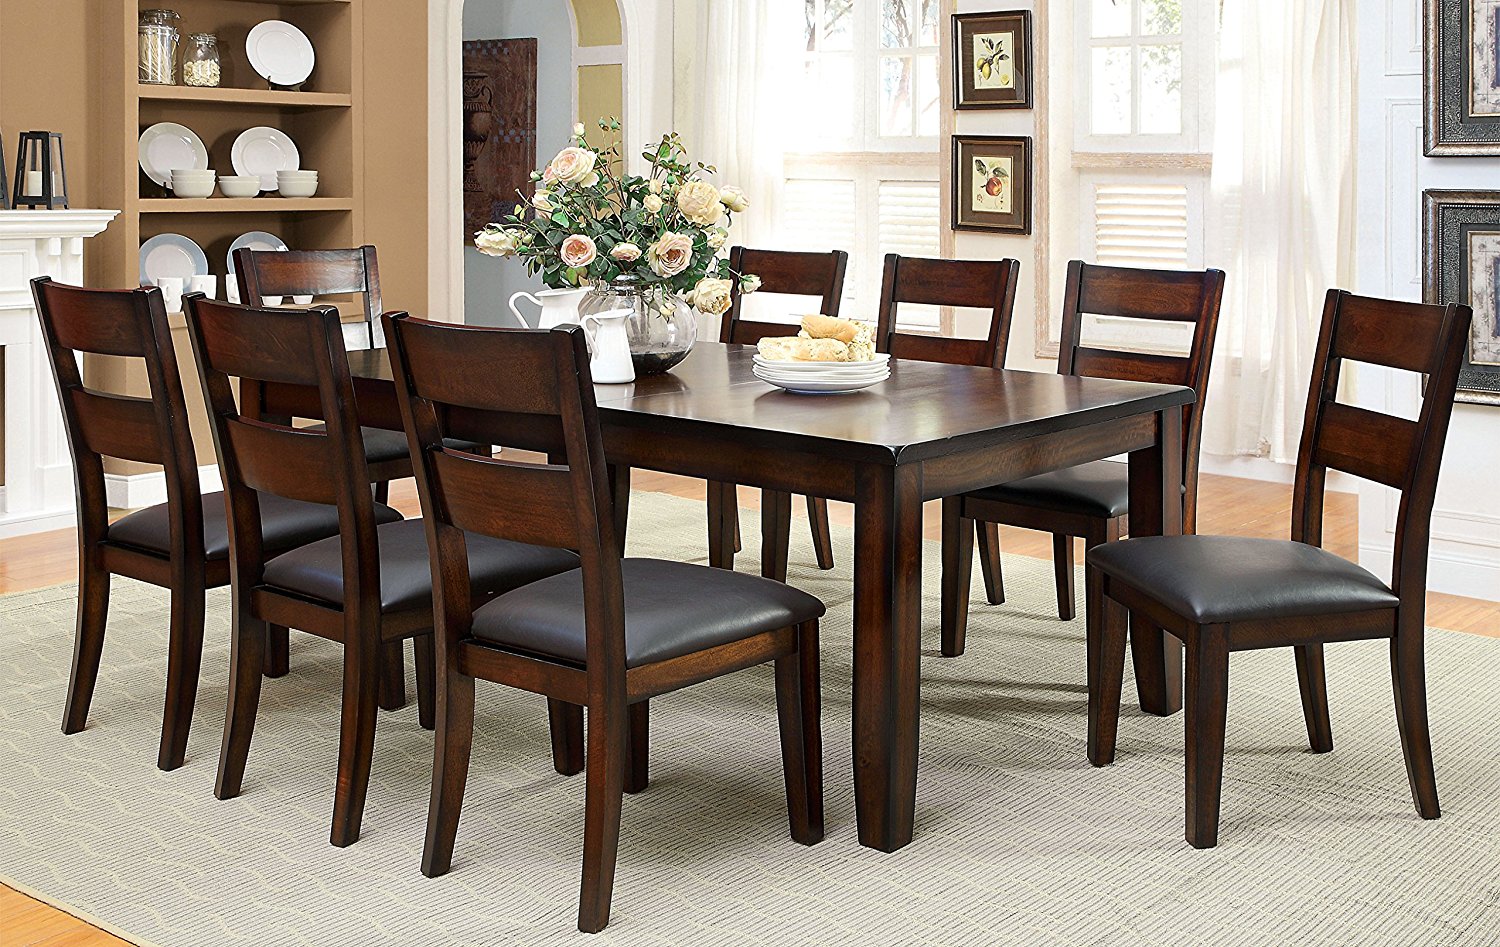 transitional style dining room sets